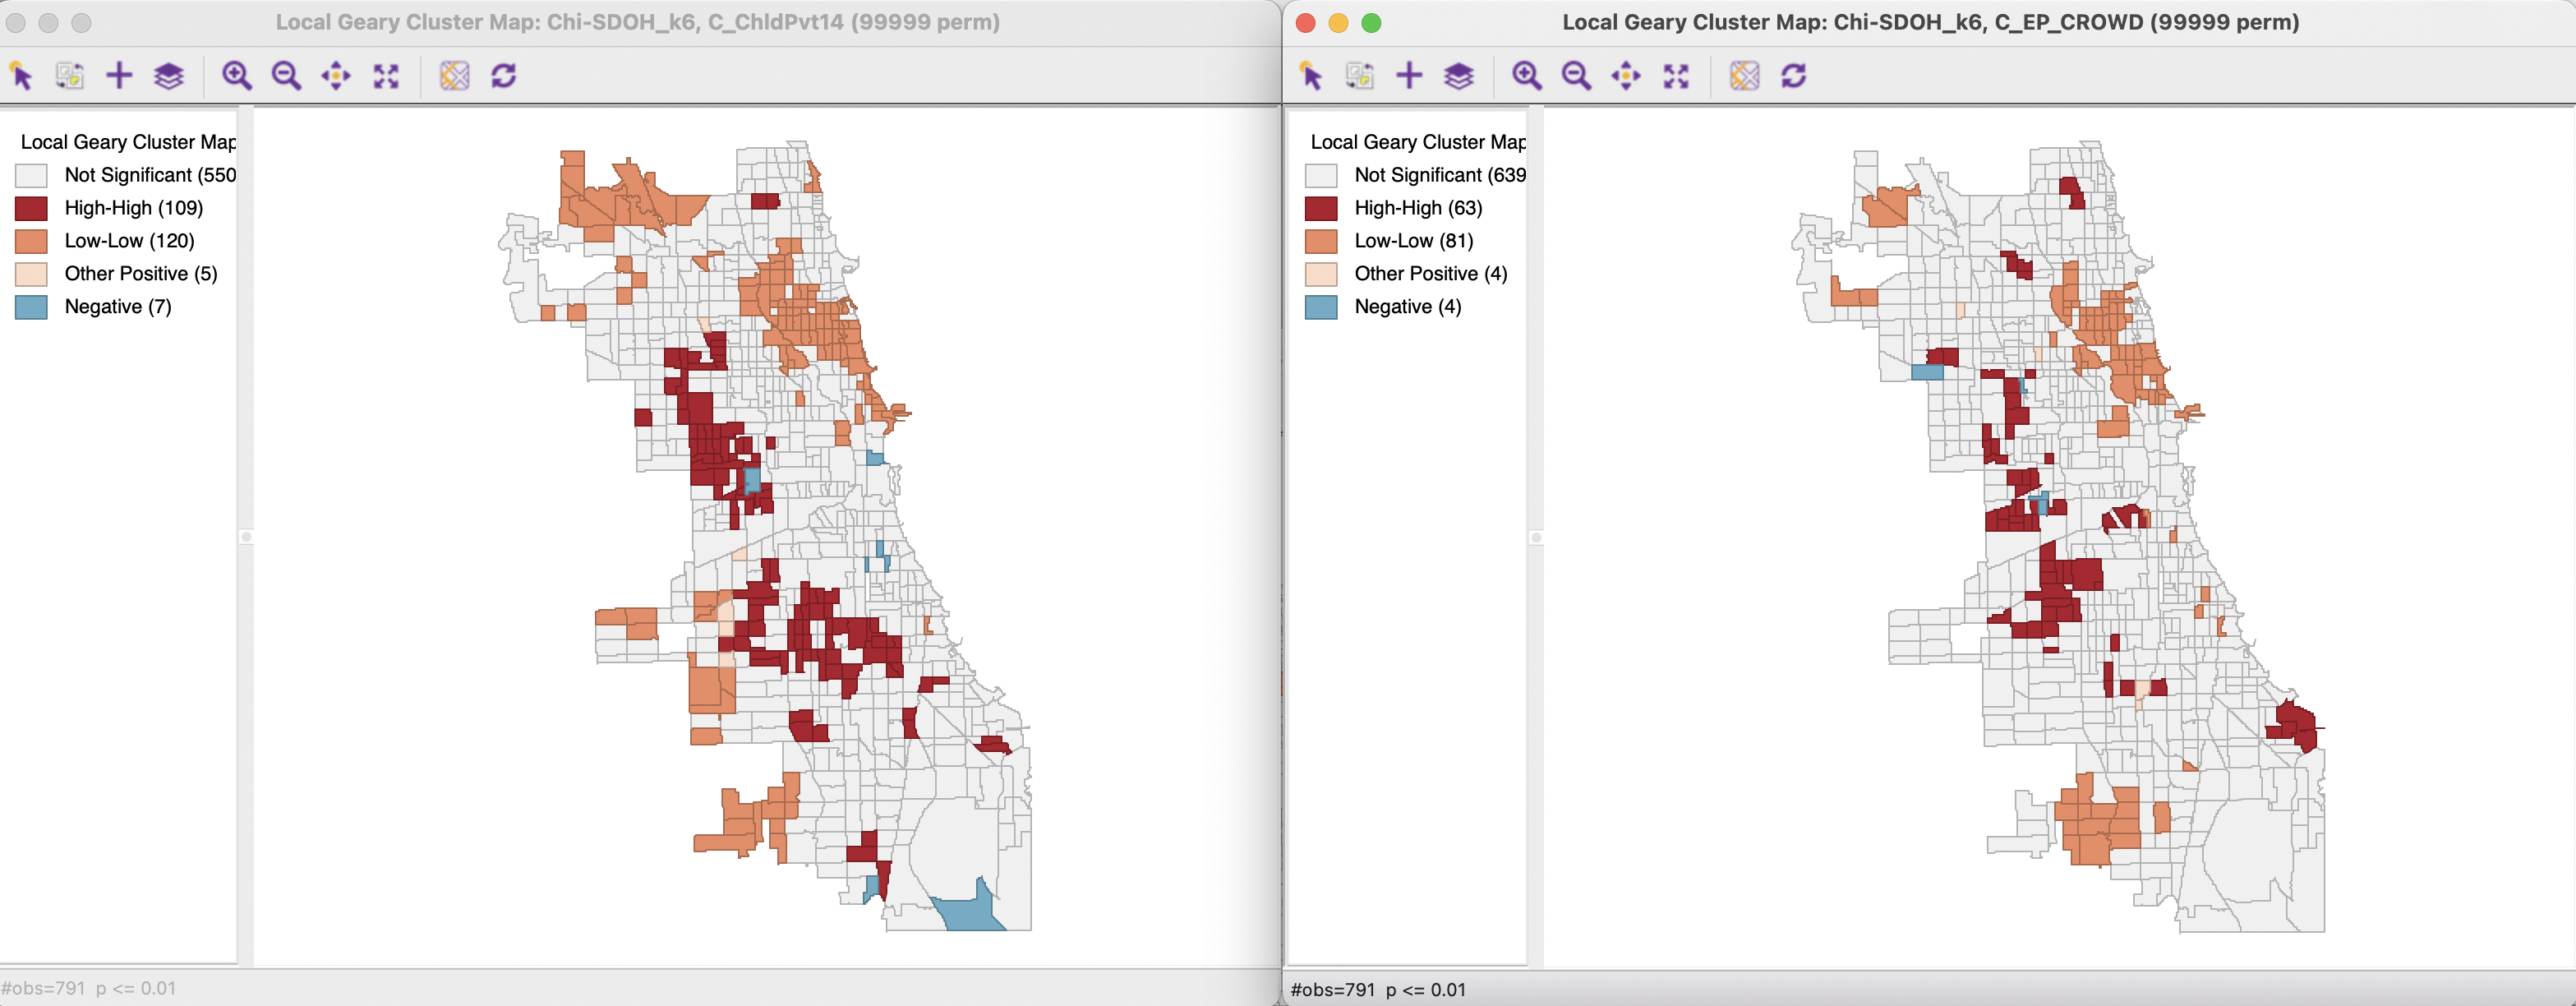 Local Geary cluster maps - Child Poverty, Crowded Housing